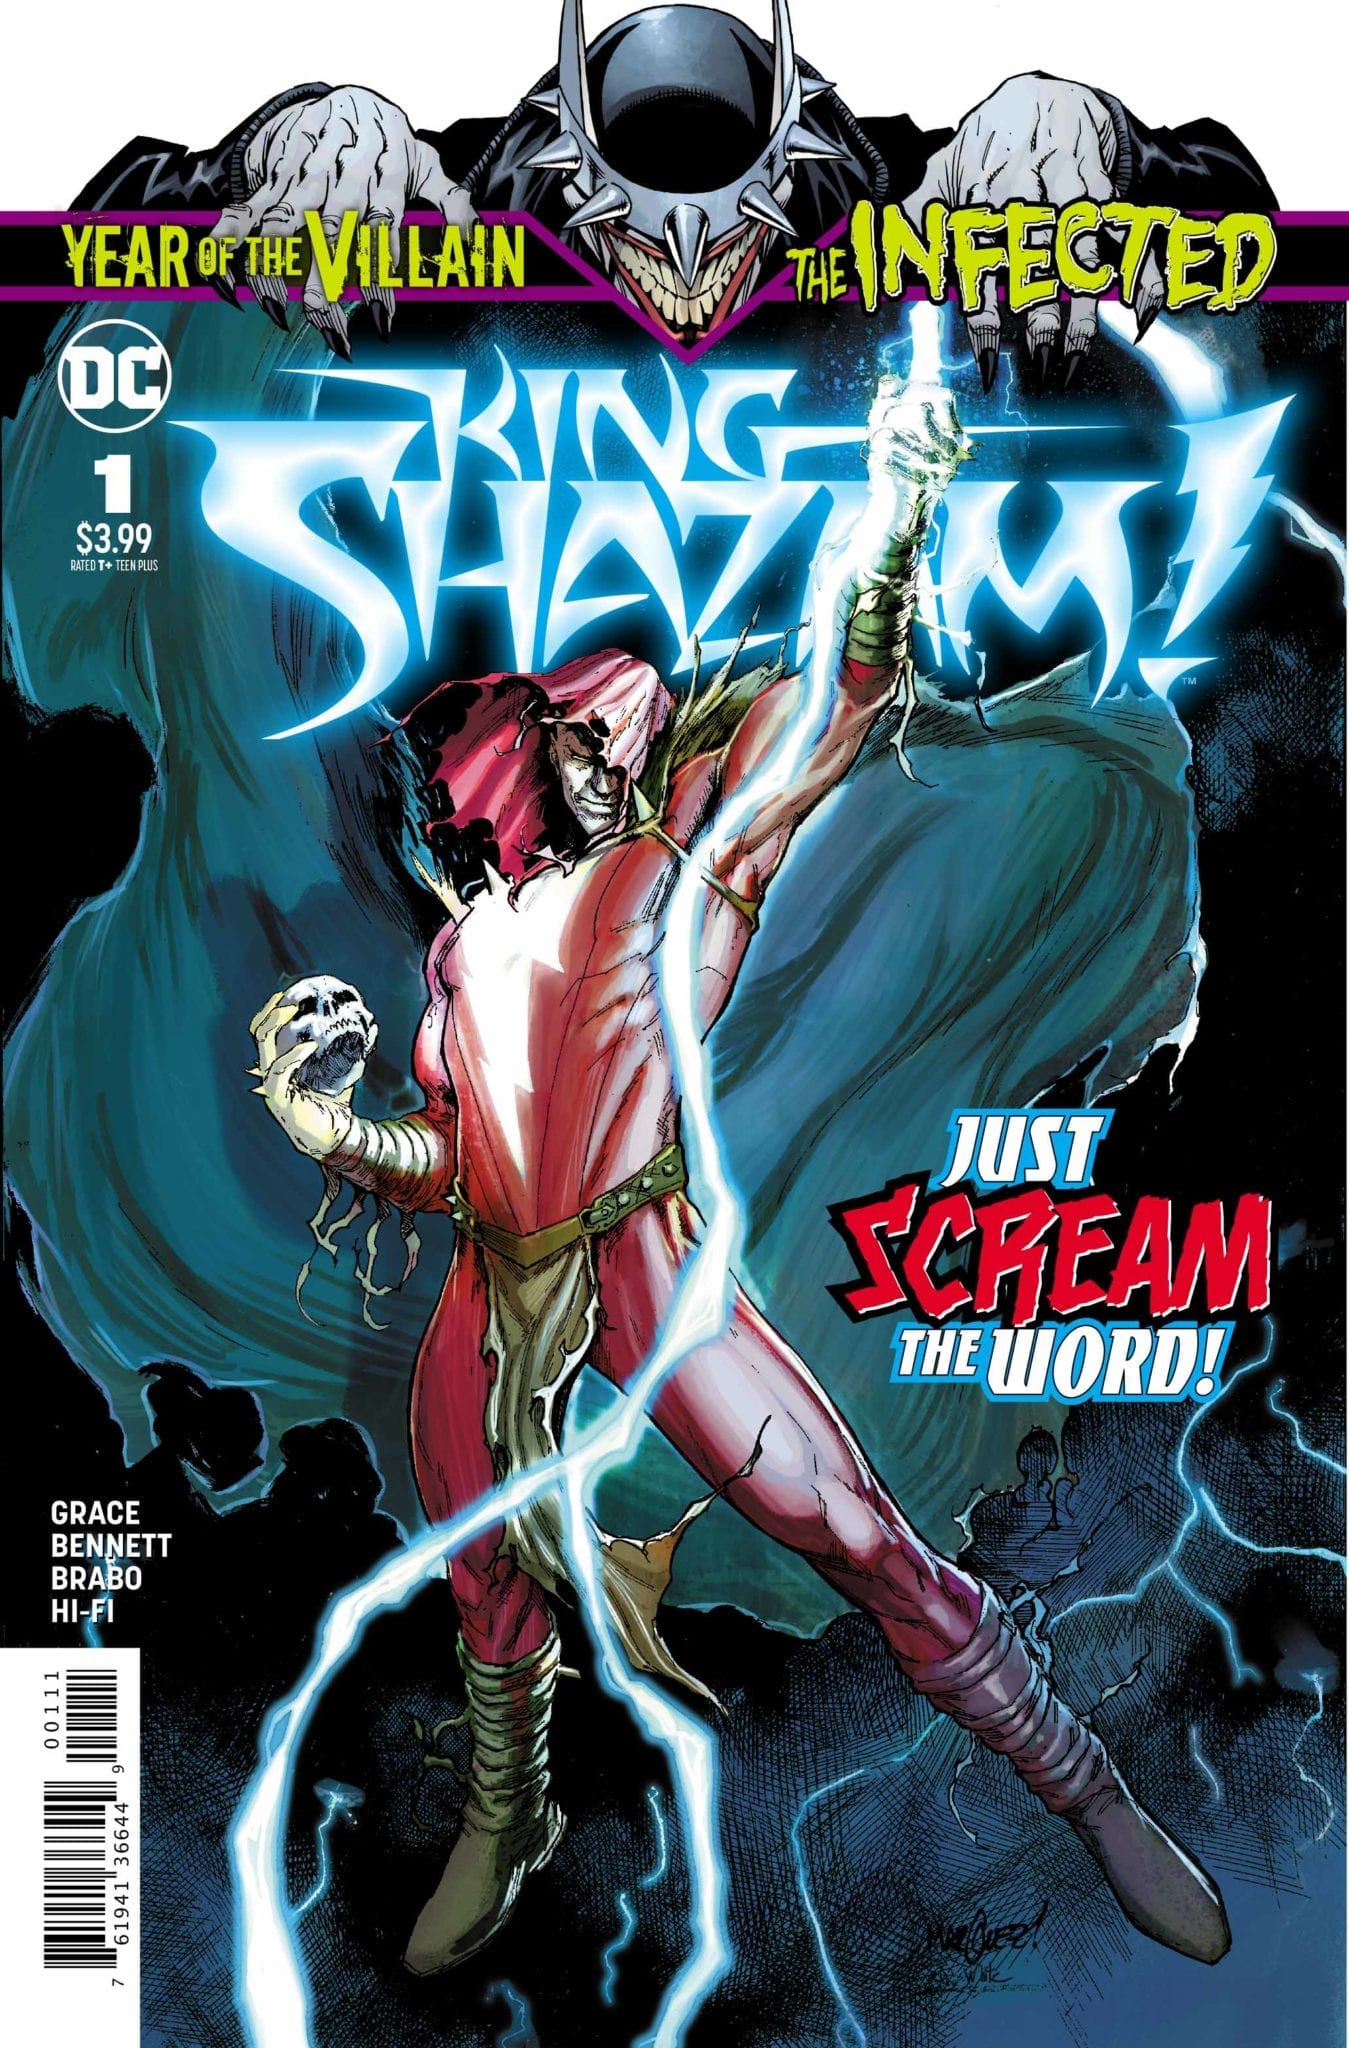 the infected king shazam dc comics review